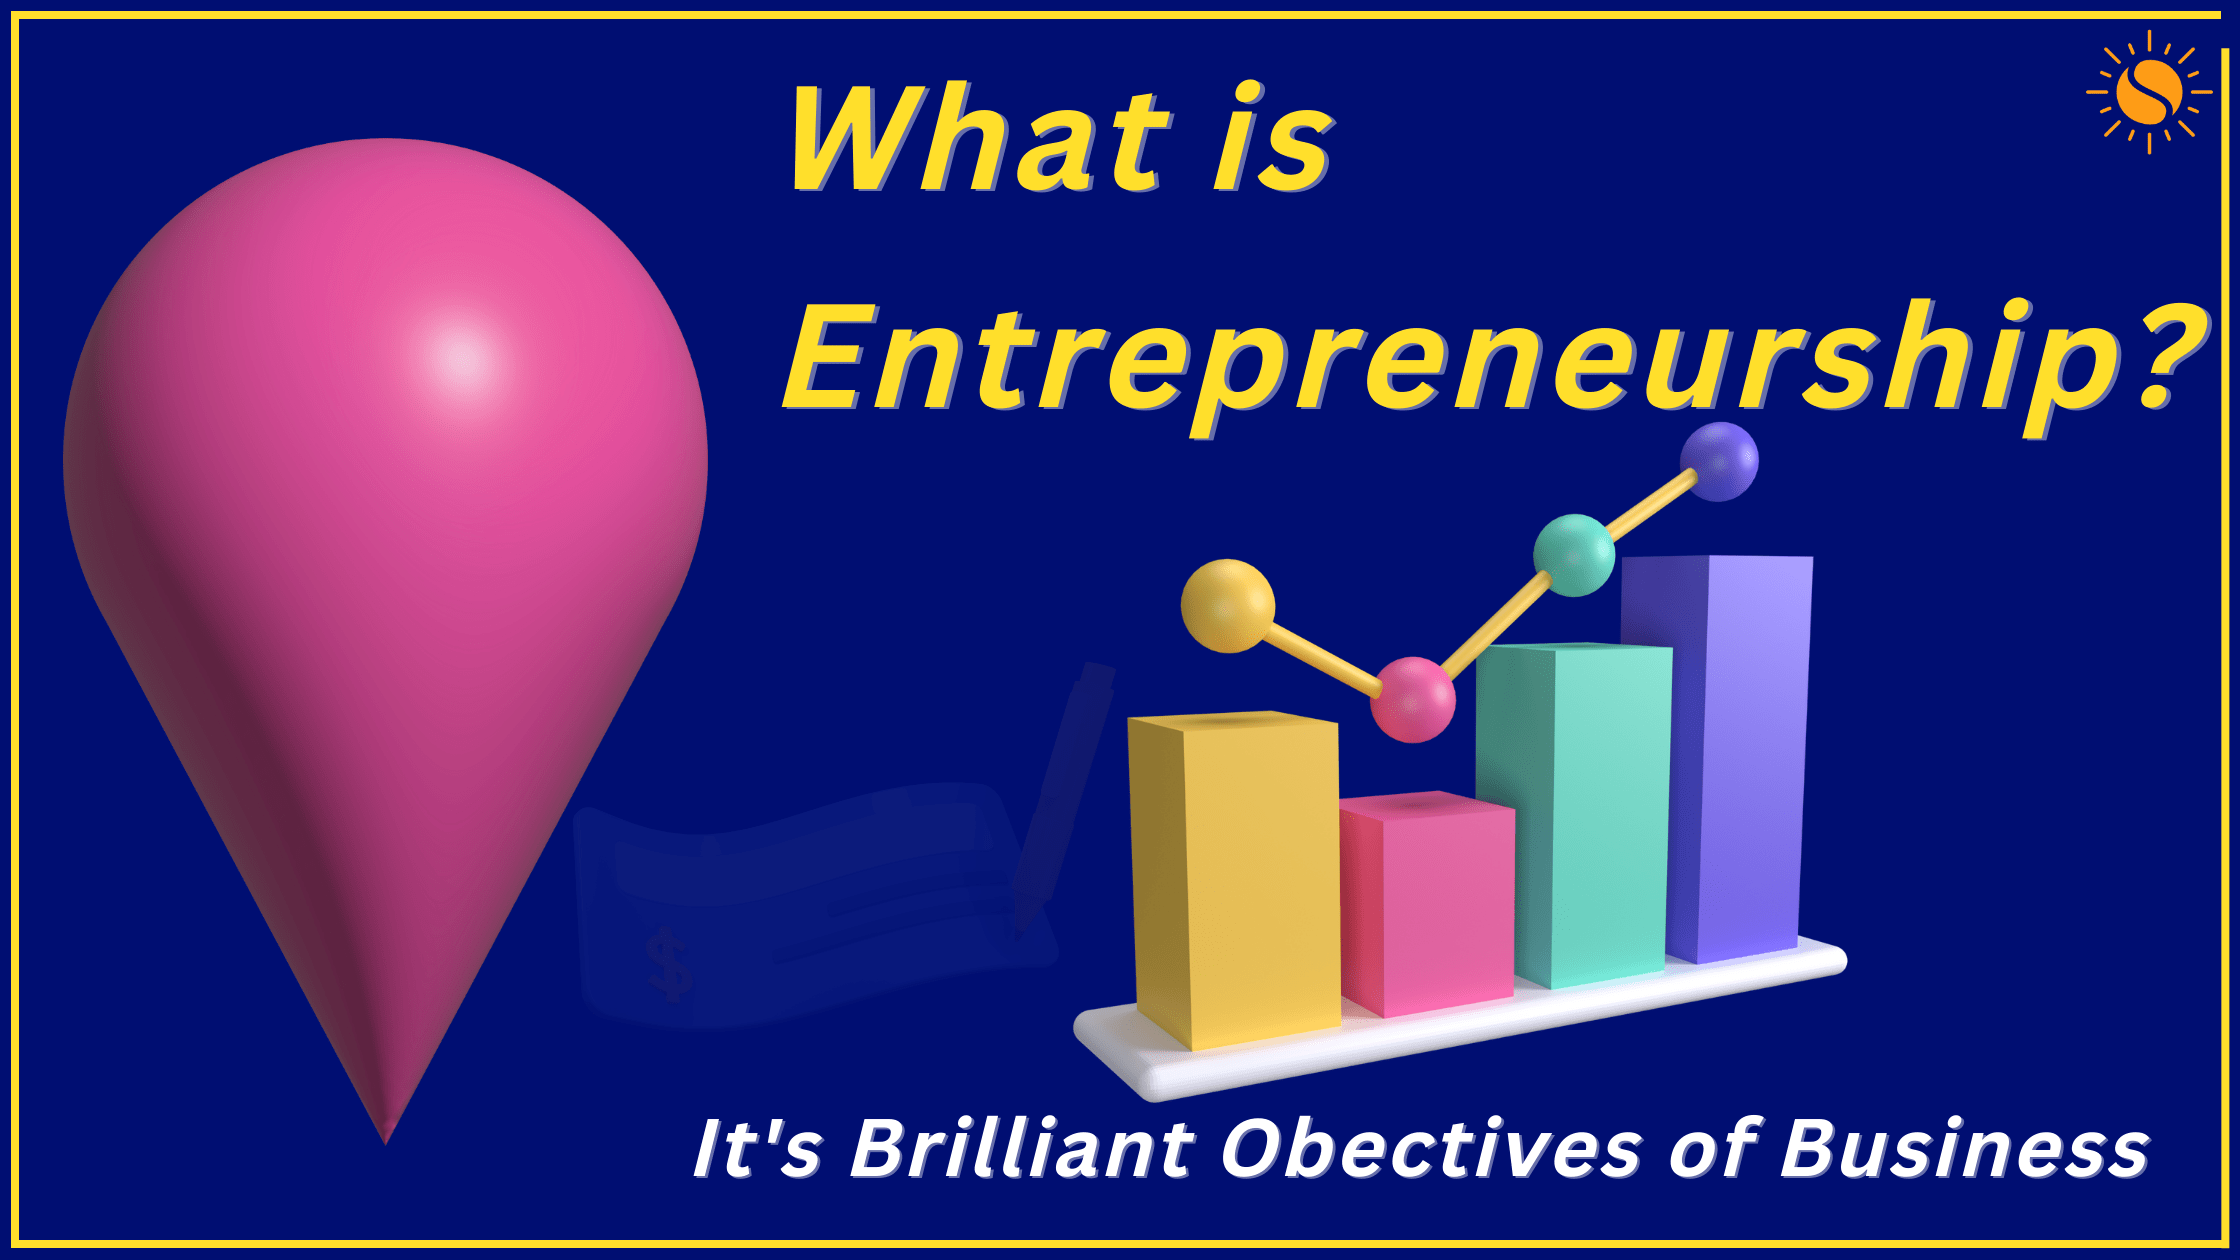 What is Entrepreneurship? and its Brilliant Objectives